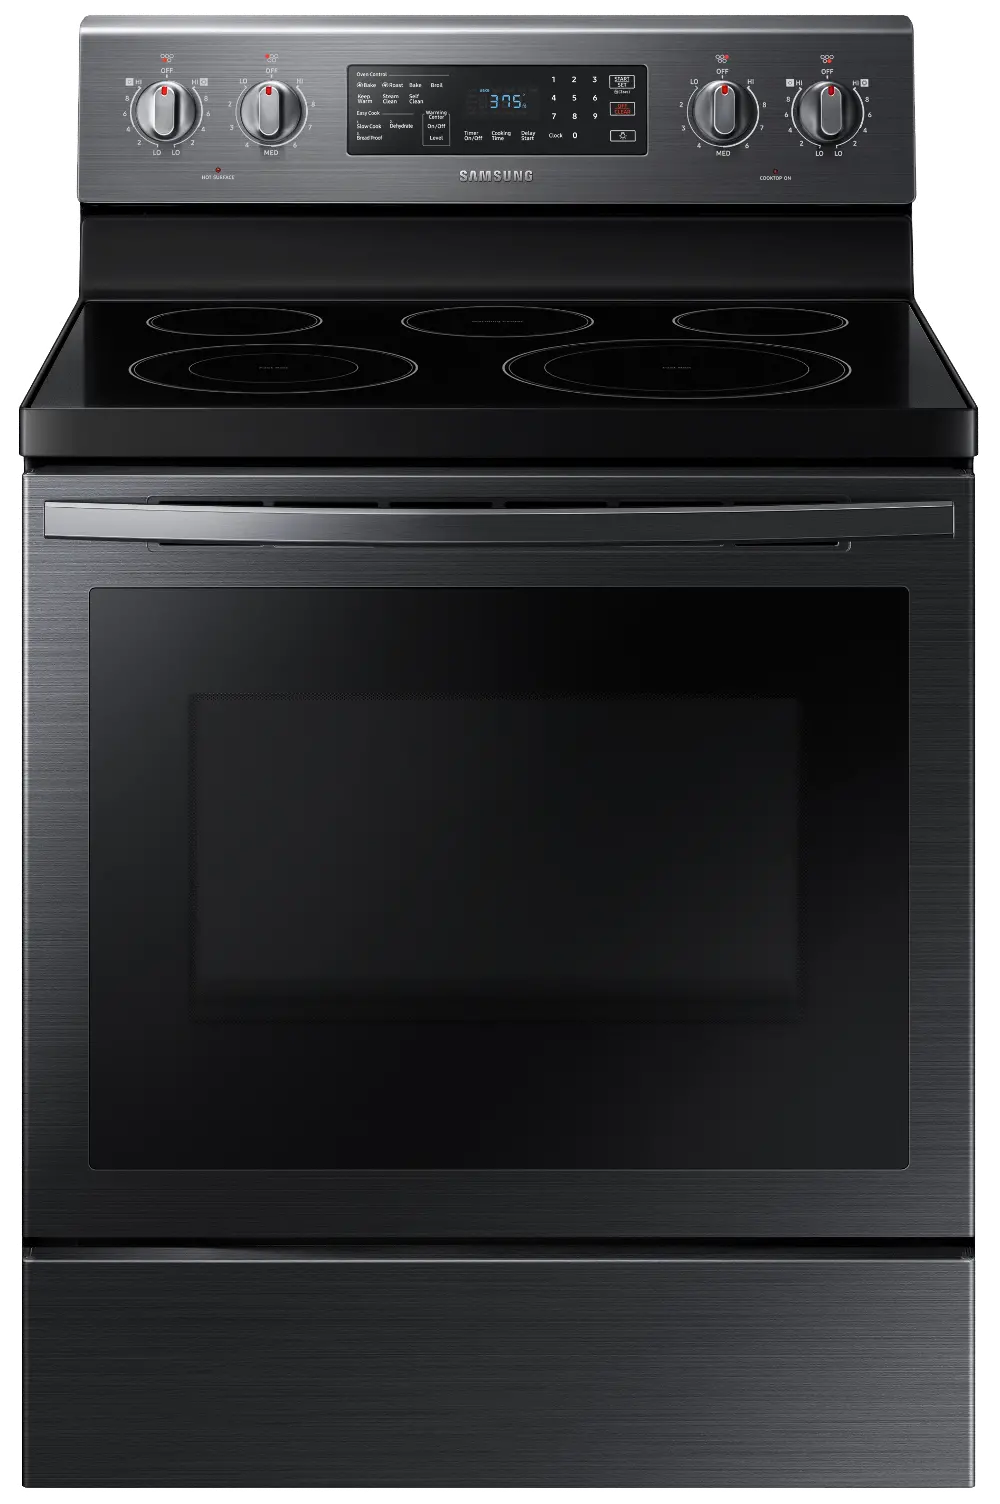 NE59T7511SG Samsung 30 Inch Electric Range with Convection and Air Fry - 5.9 cu. ft. Black Stainless Steel-1